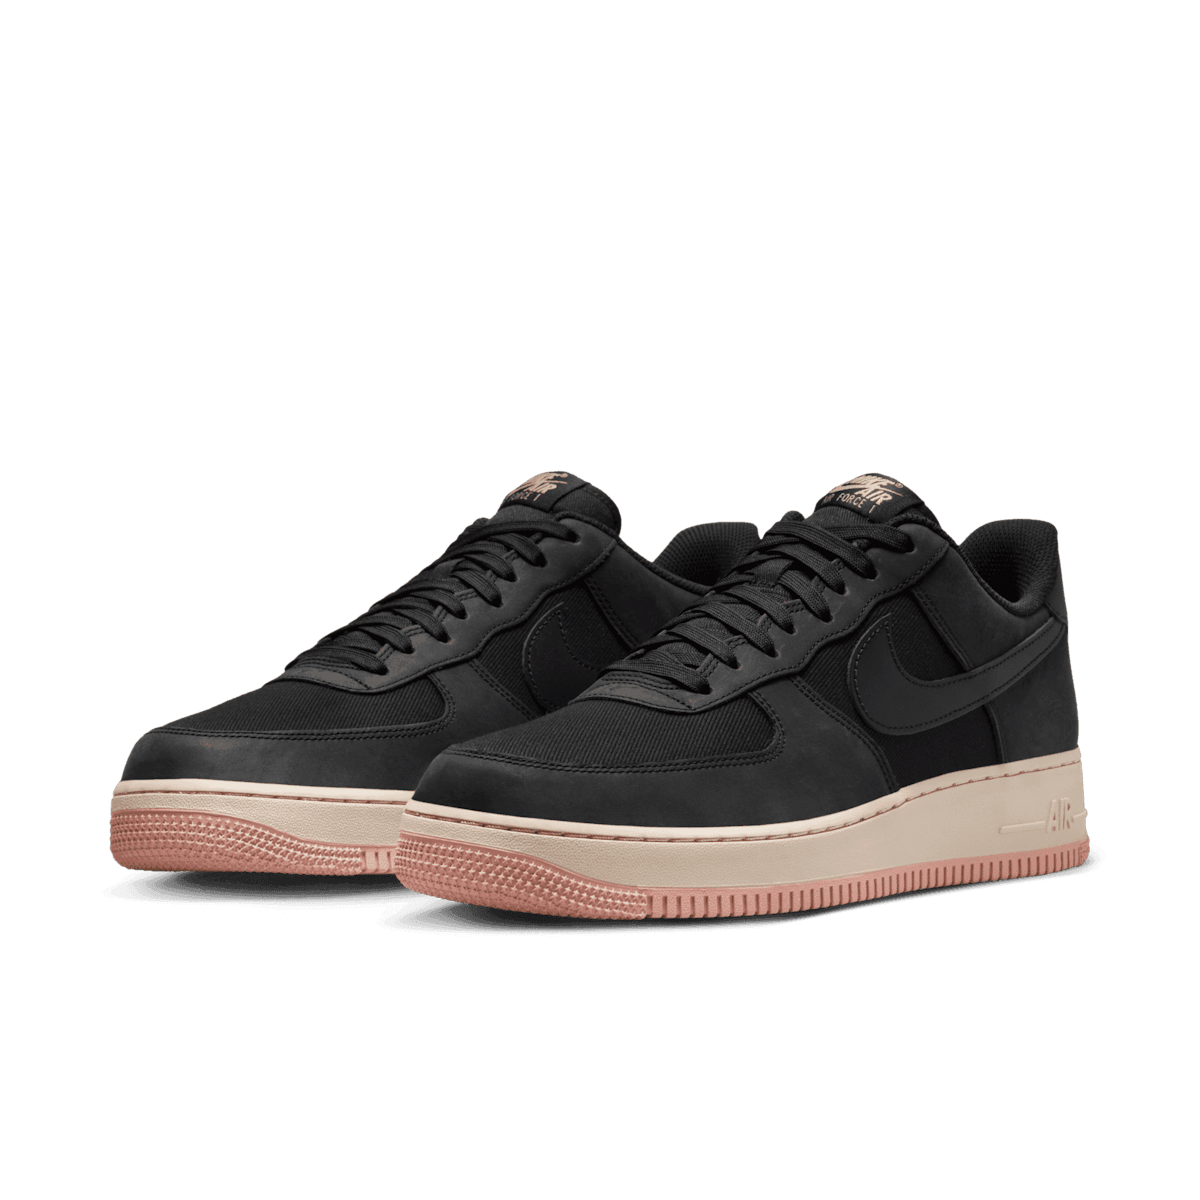 Nike Air Force 1 Low LX Black Red Stardust Angle 2